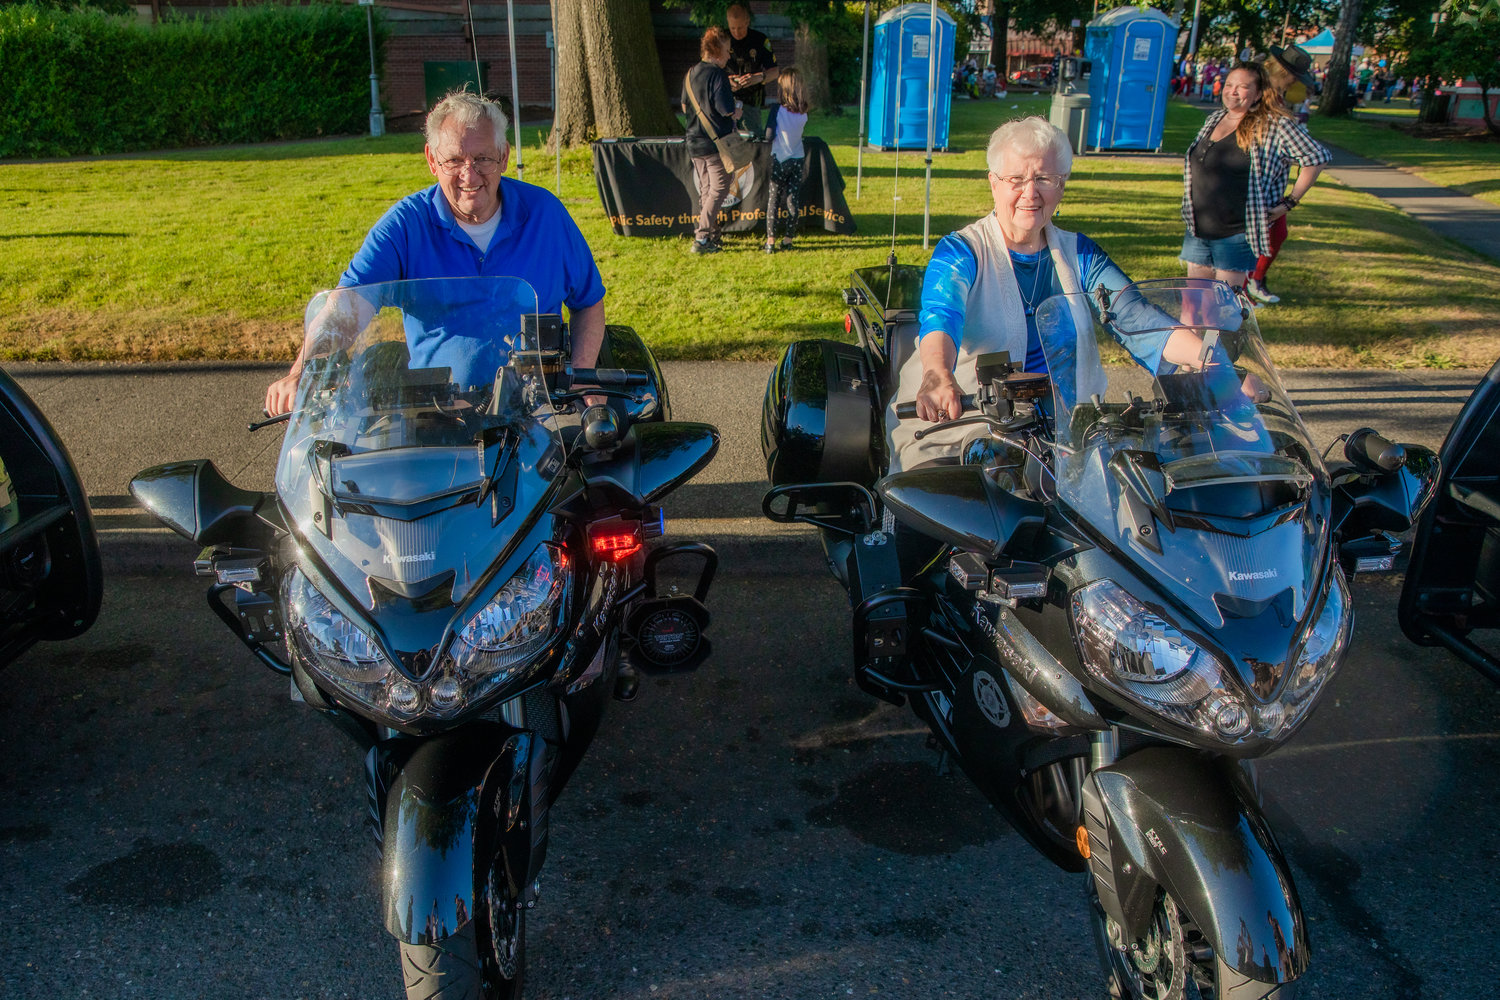 Lee Coumbs and Bonnie Canaday smile for a photo on motorcycles from the Lewis County Sheriff’s Office Tuesday at George Washington Park during a National Night Out event in downtown Centralia.